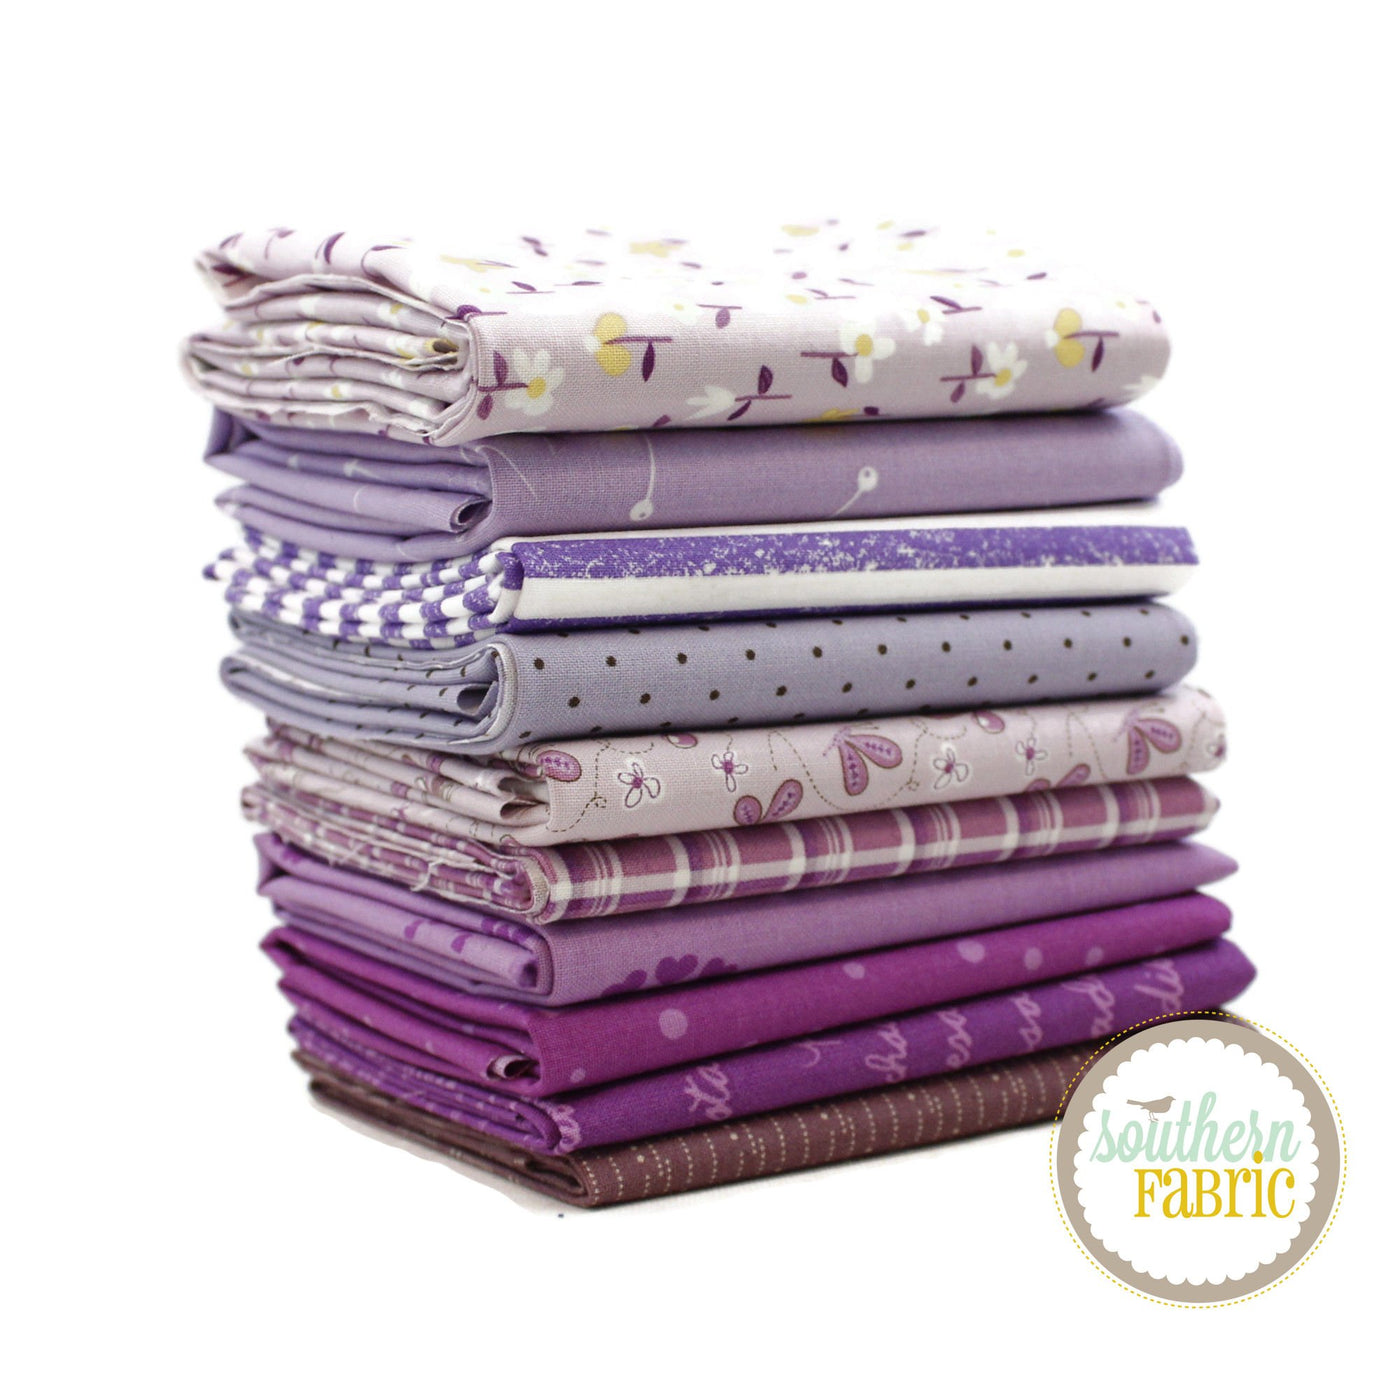 Violet and Purple Fat Quarter Bundle (10 pcs) by Mixed Designers for Southern Fabric